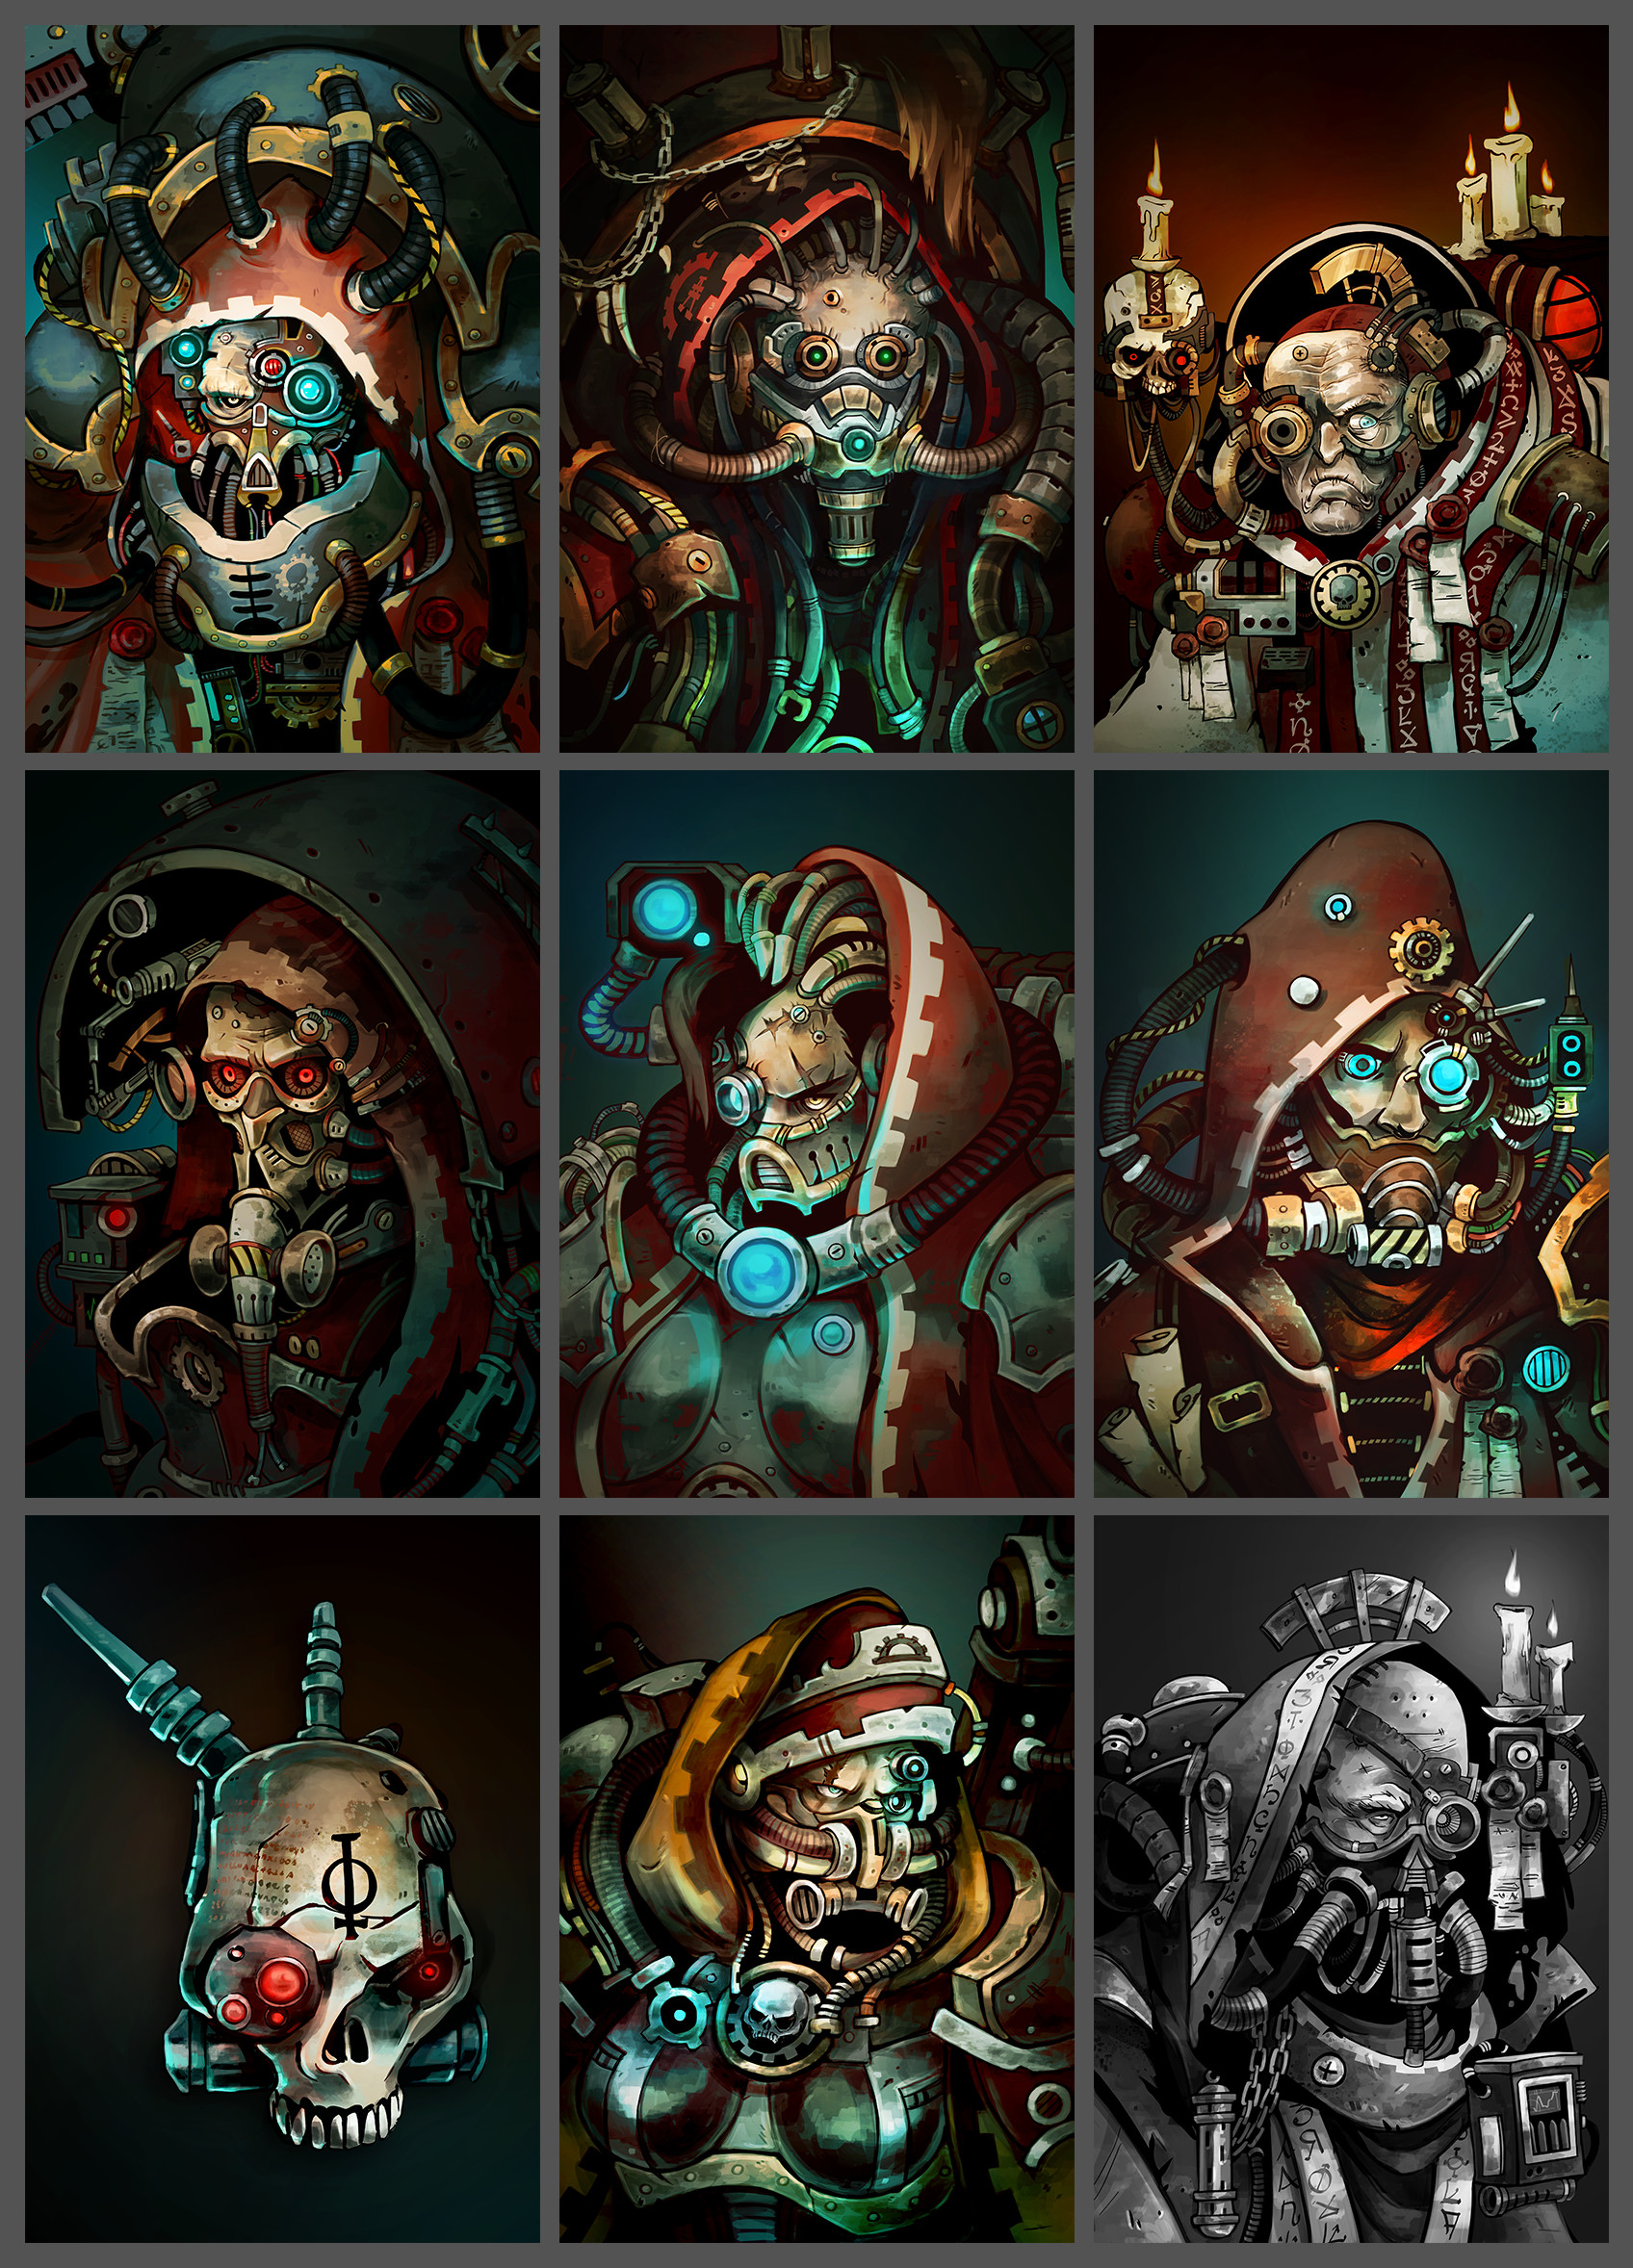 Who are the Mechanicus characters in Warhammer 40k?